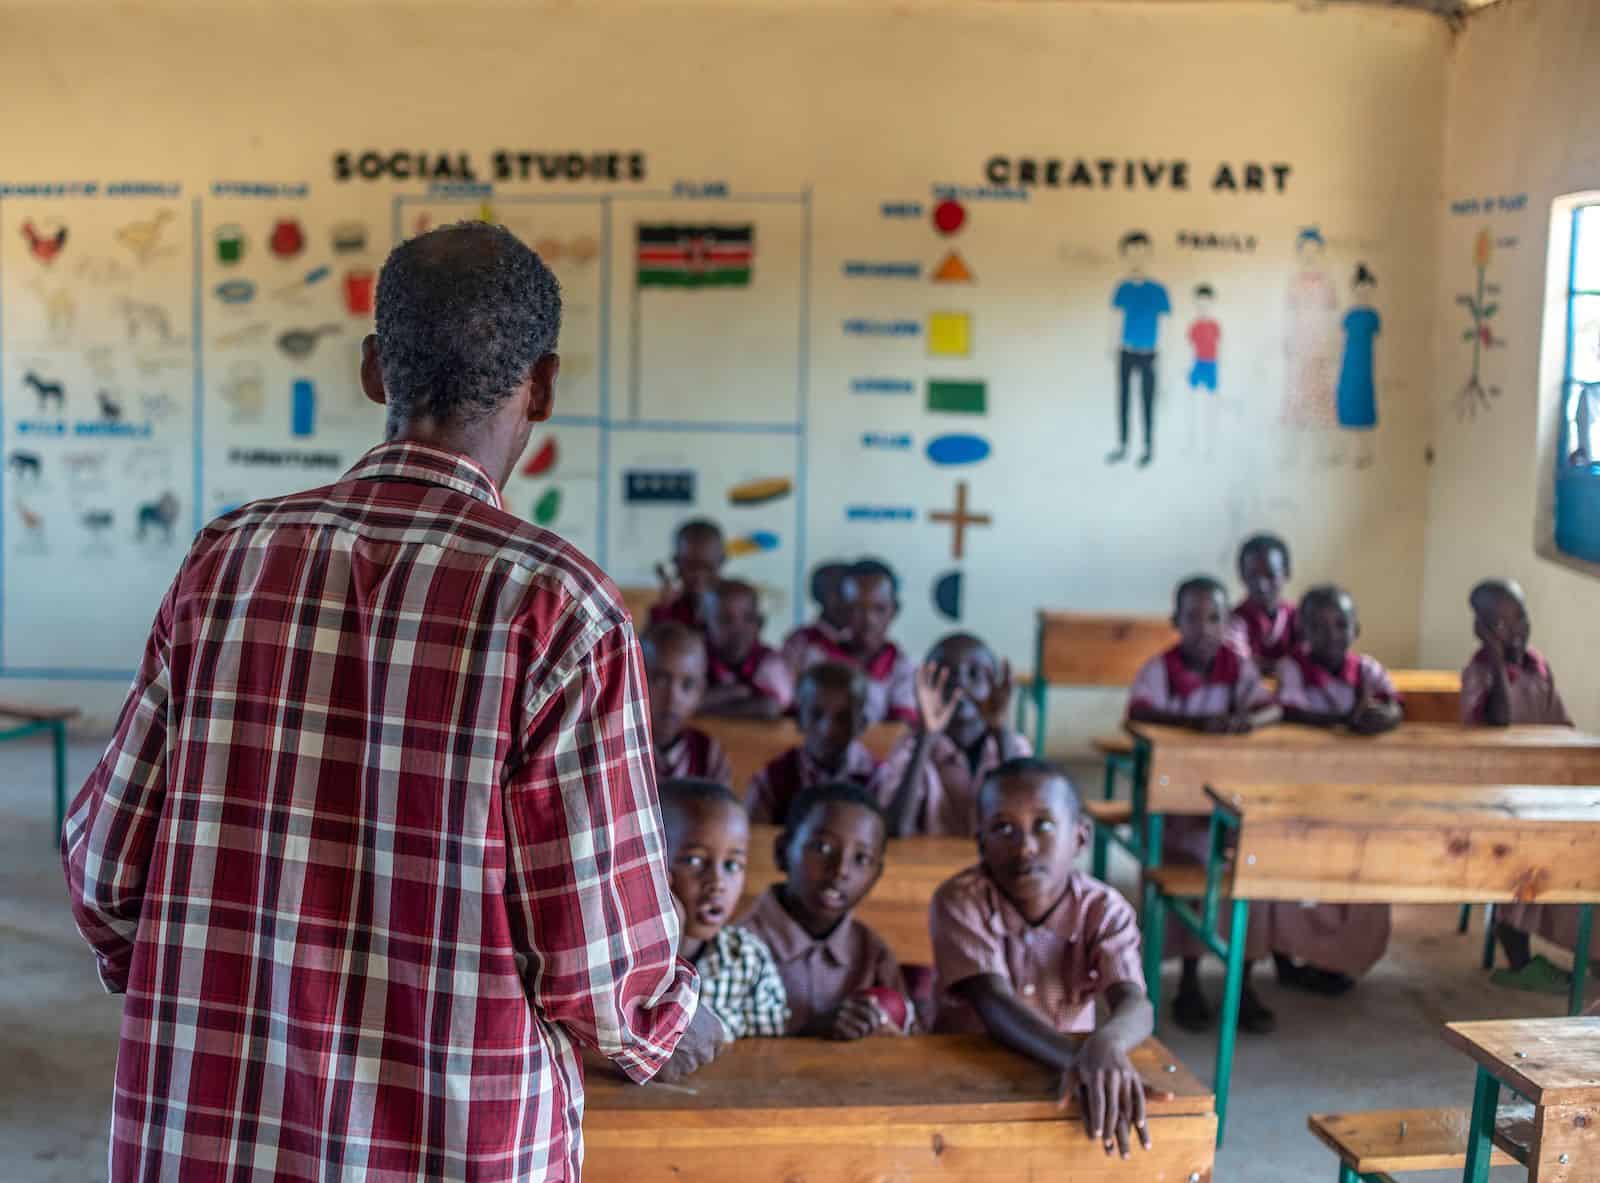 A man in a plaid shirt stands at the front of a classroom, with children wearing red school uniforms sitting at desks and listening.